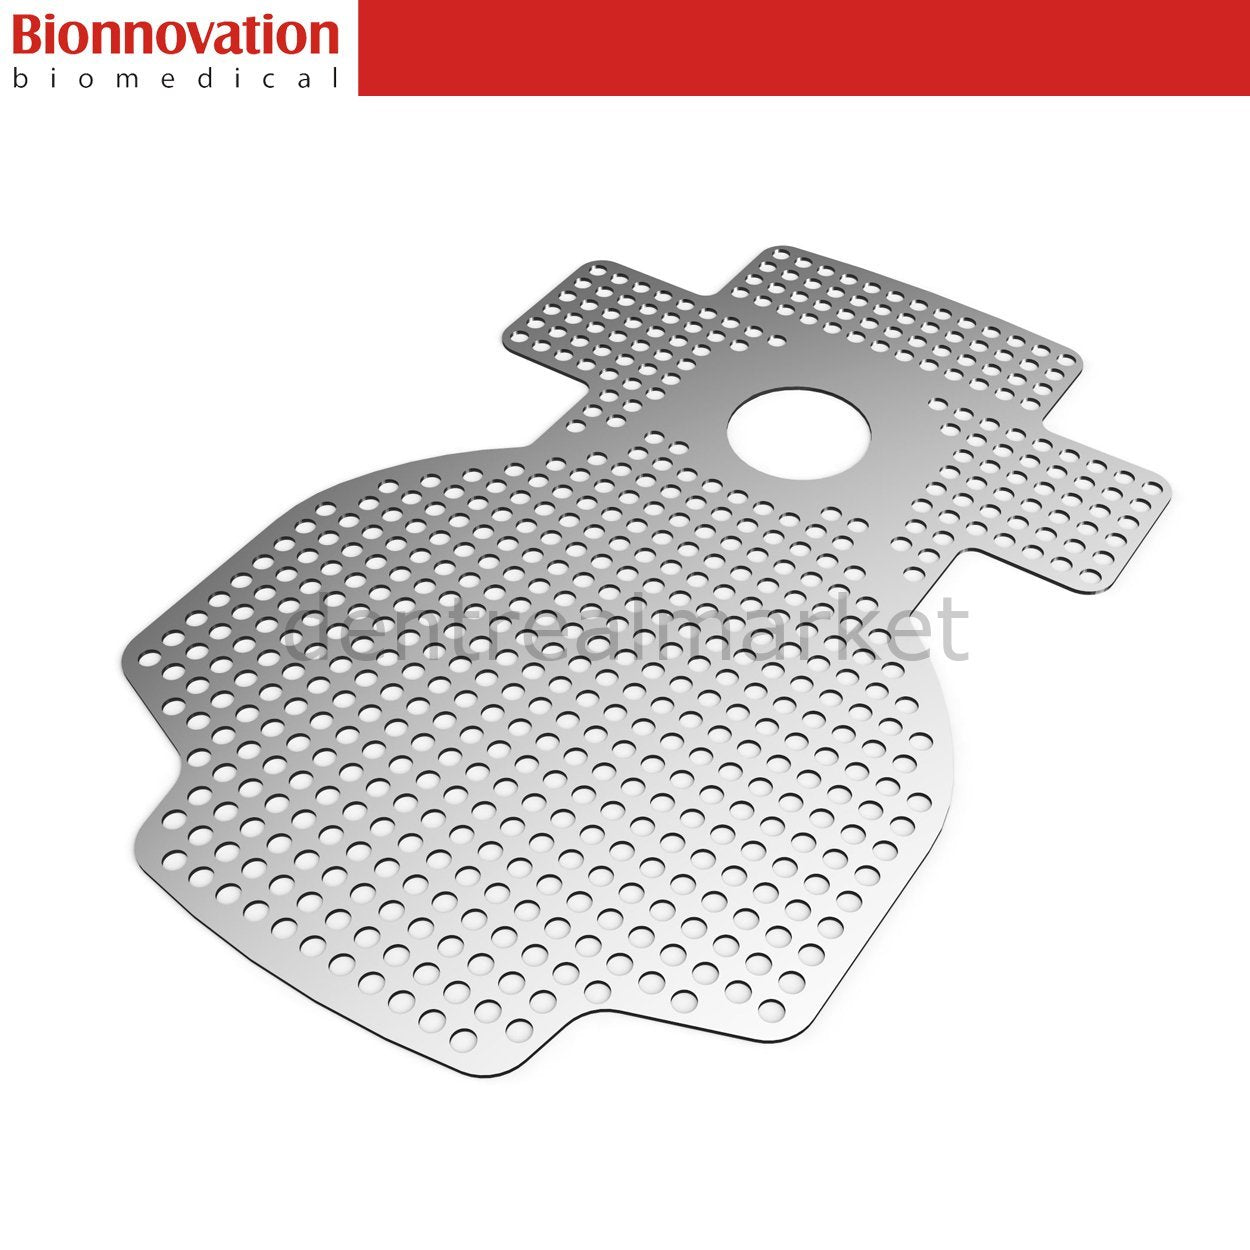 DentrealStore - Bionnovation Surgitime Titanium Mesh - Non-Absorbable customized to the surgical mesh - 3DF 3 in 1